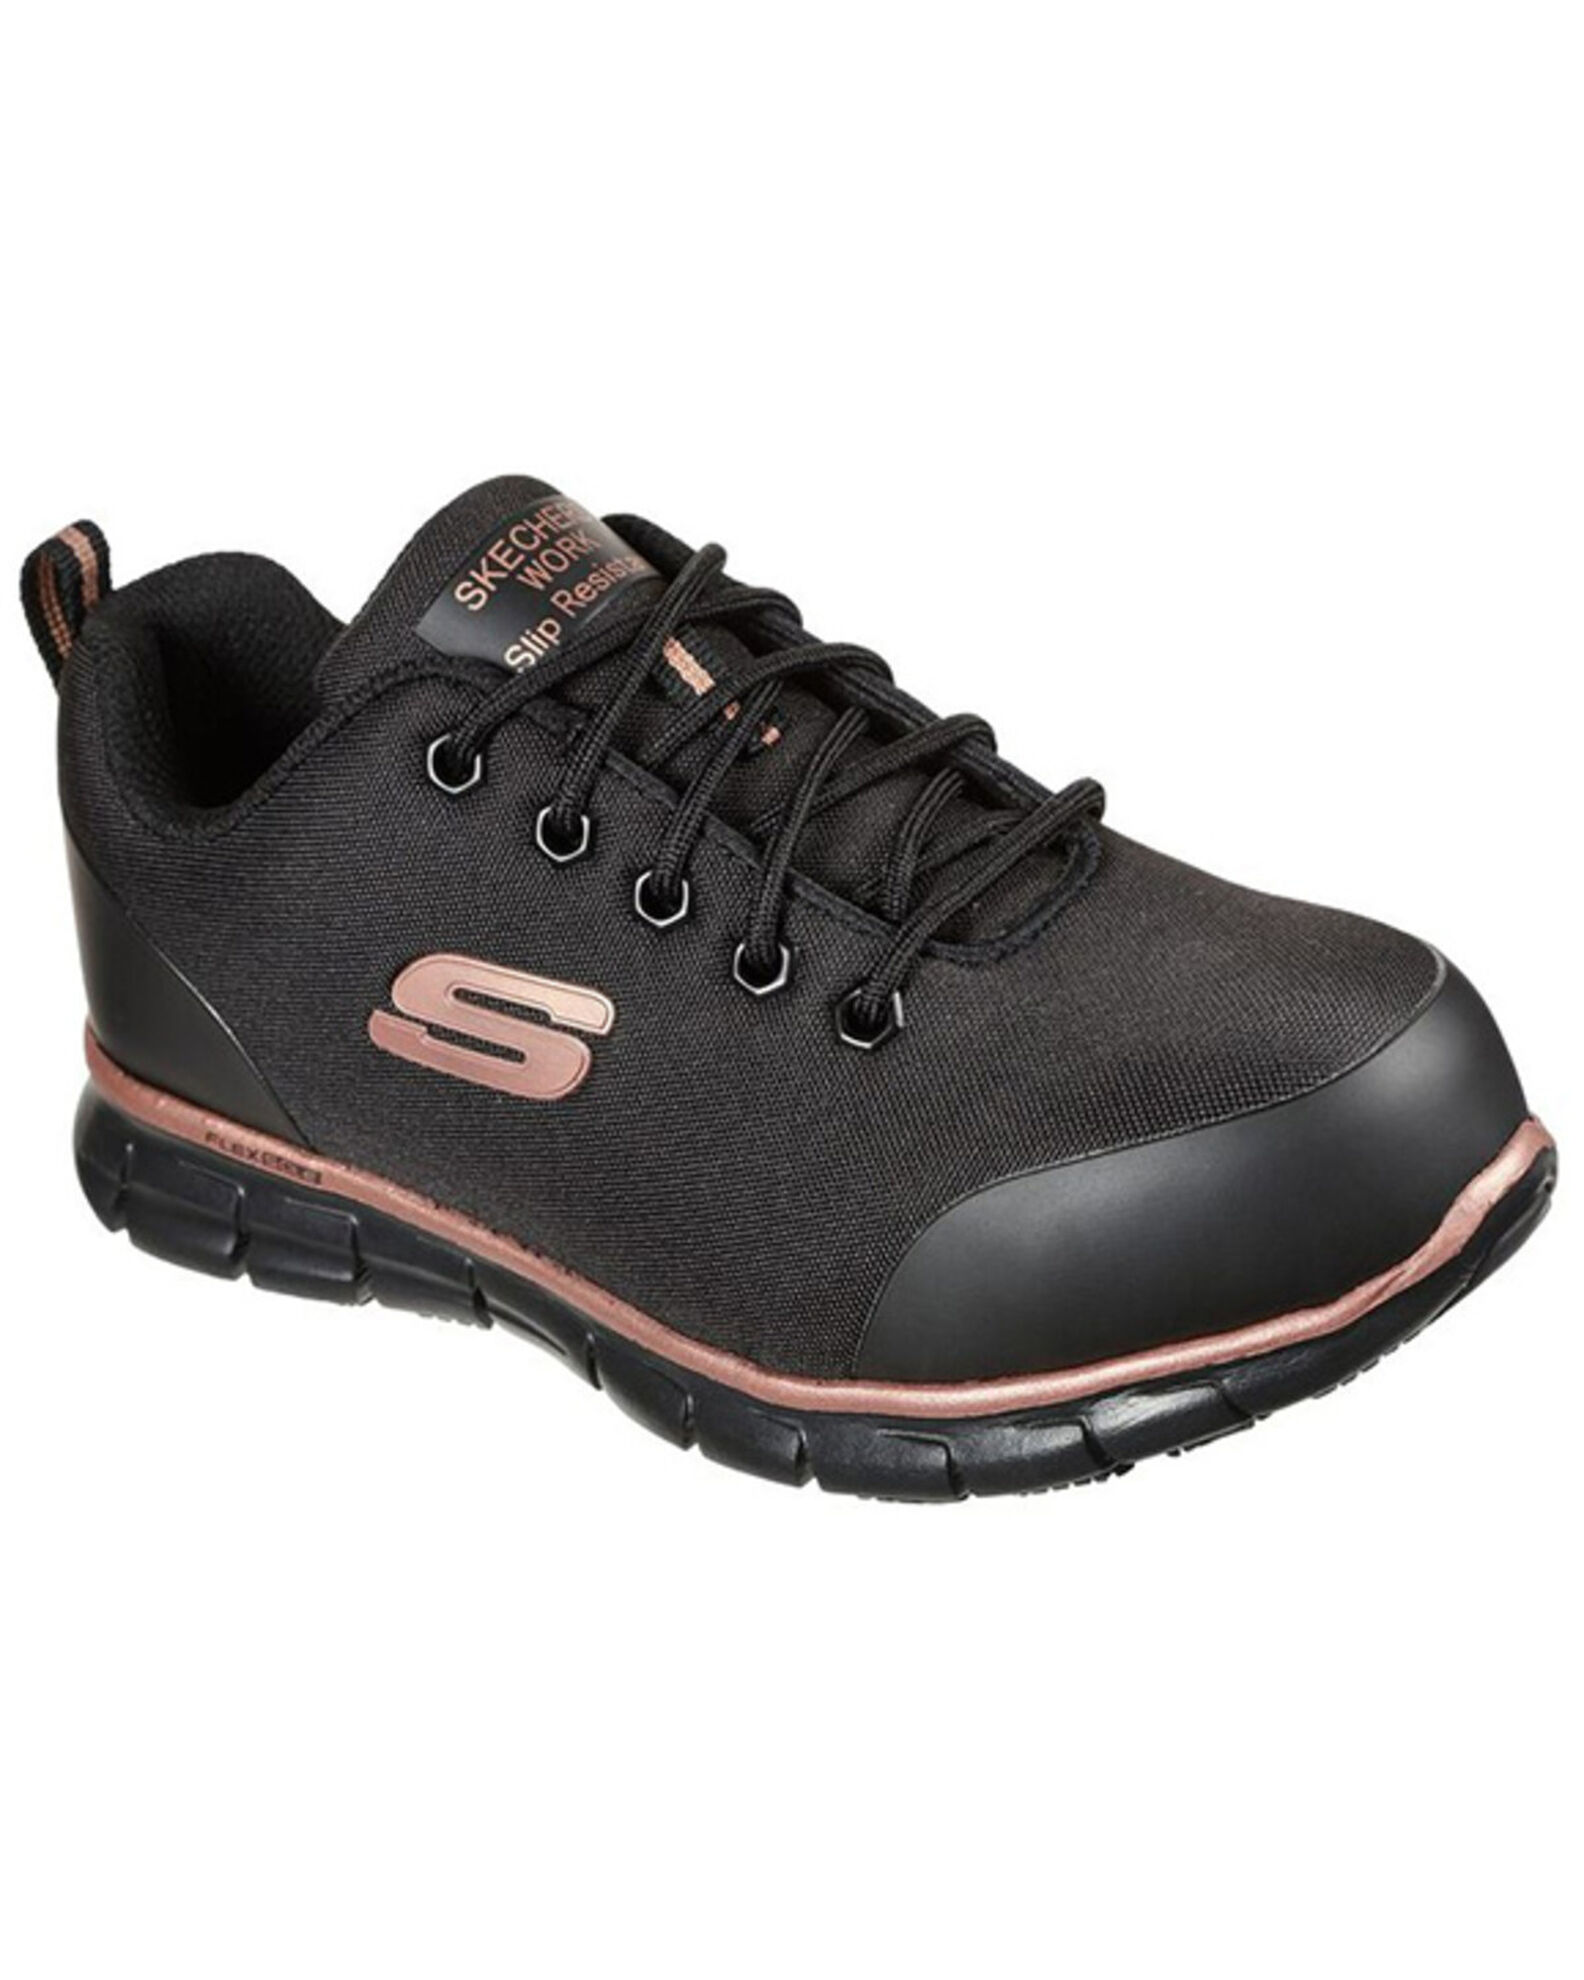 Skechers Track Lightweight Chiton Work Shoes Alloy Toe | Boot Barn